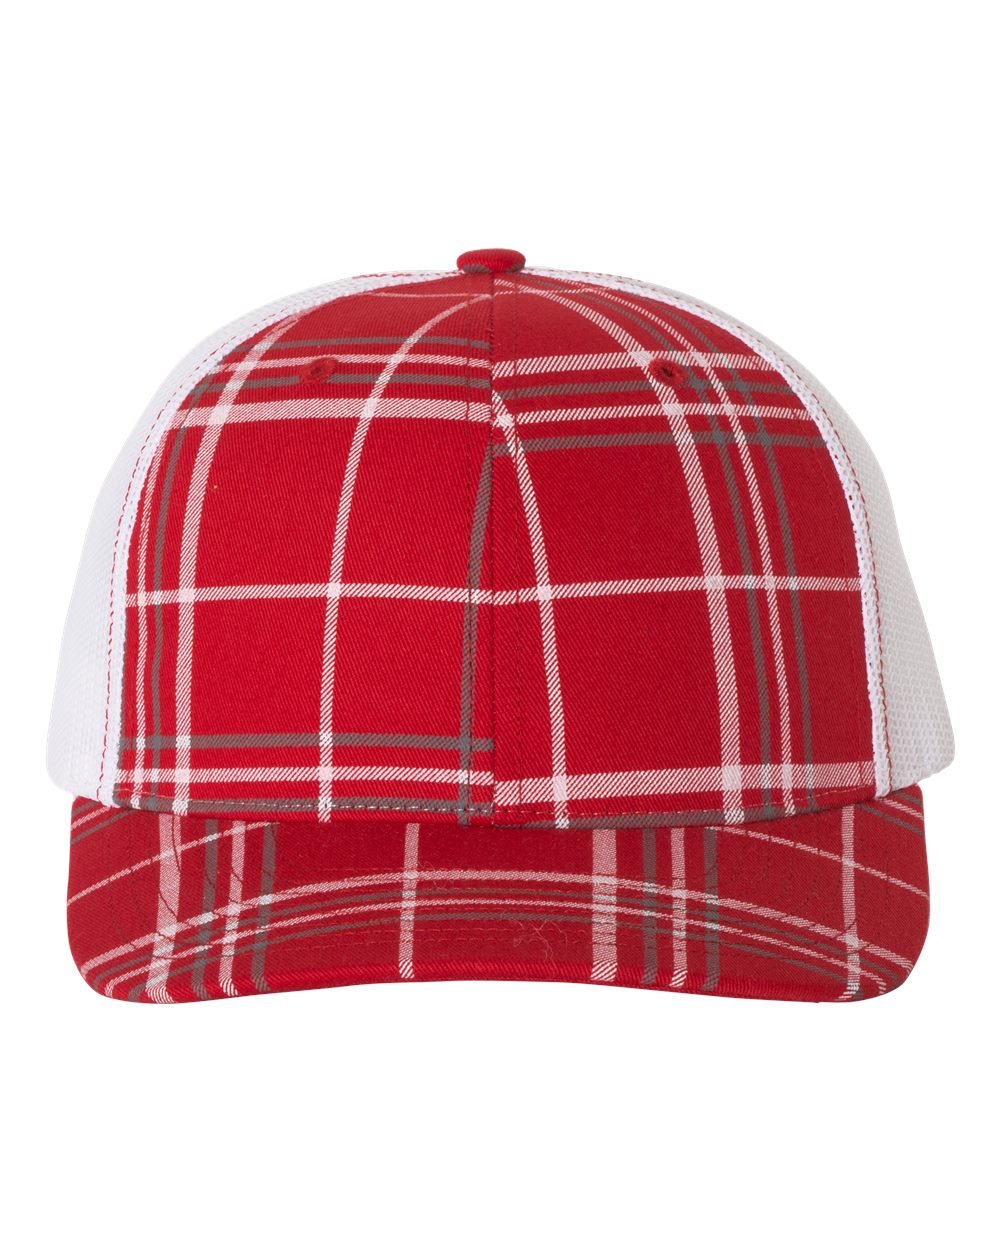 Richardson Patterned Snapback Trucker Cap 112P #color_Plaid Print Red/ Charcoal/ White